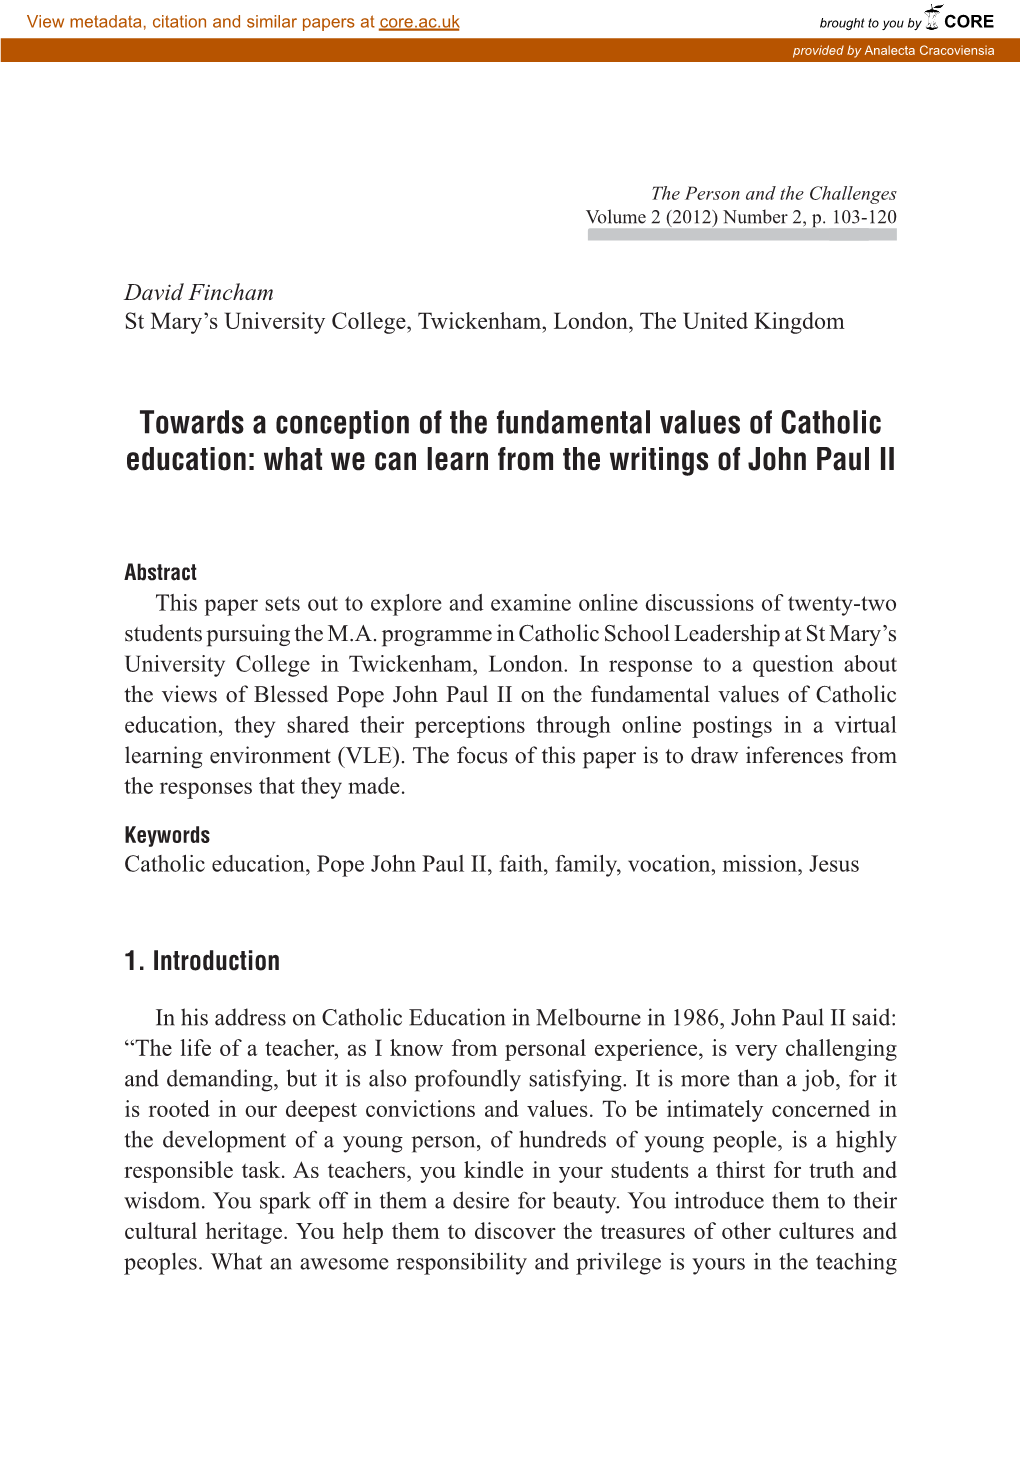 Towards a Conception of the Fundamental Values of Catholic Education: What We Can Learn from the Writings of John Paul II